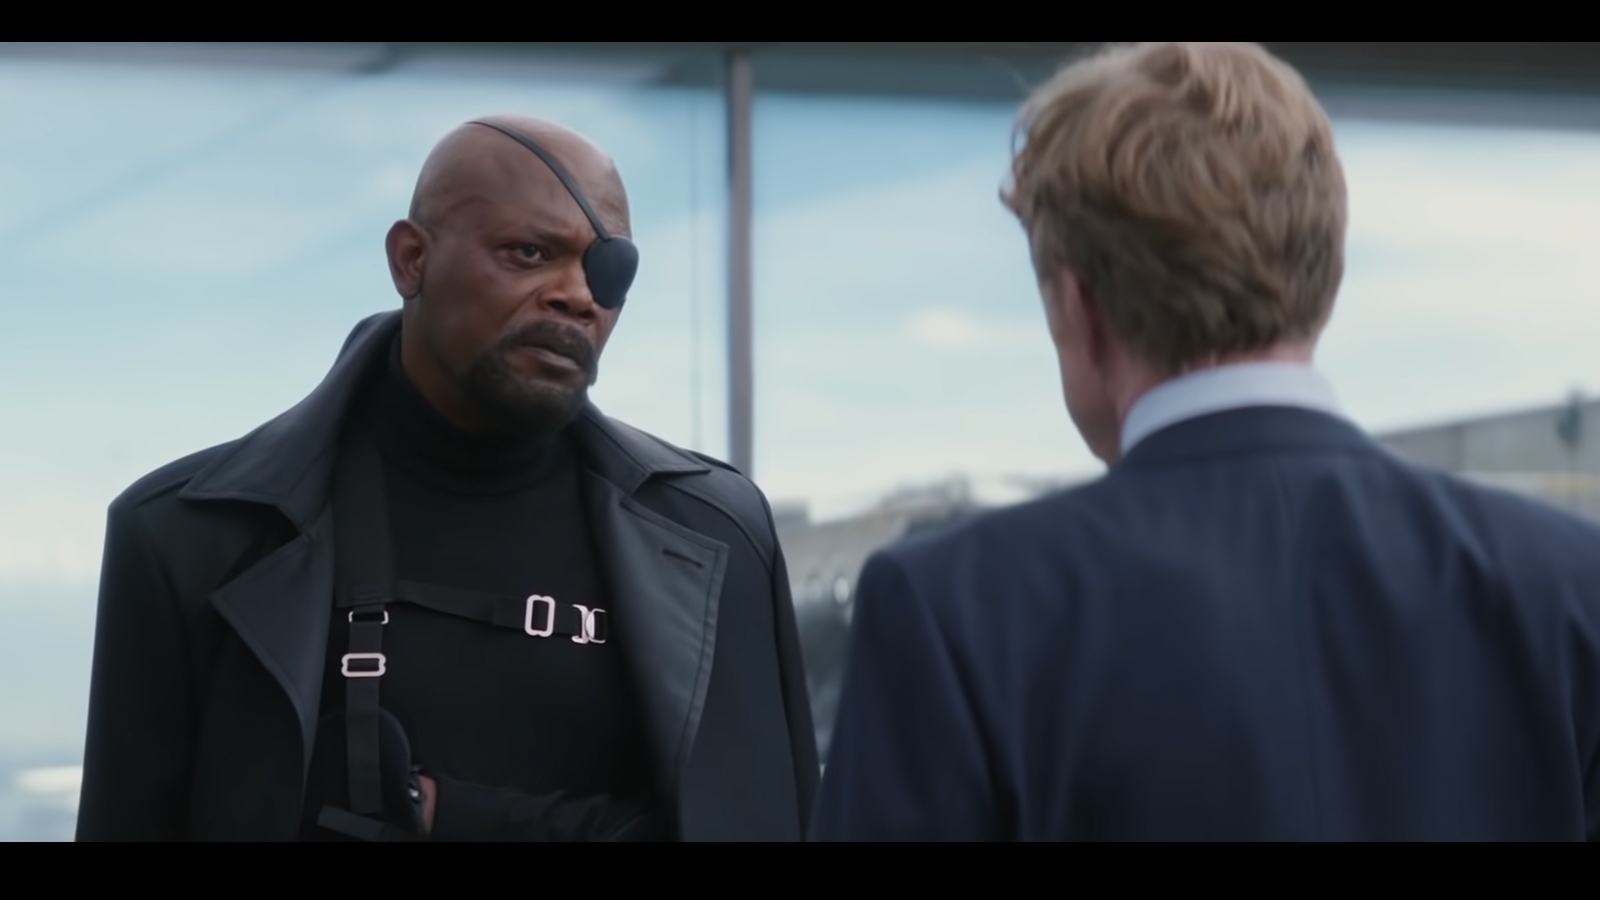 Will Nick Fury be in ‘Ant-Man 3’?